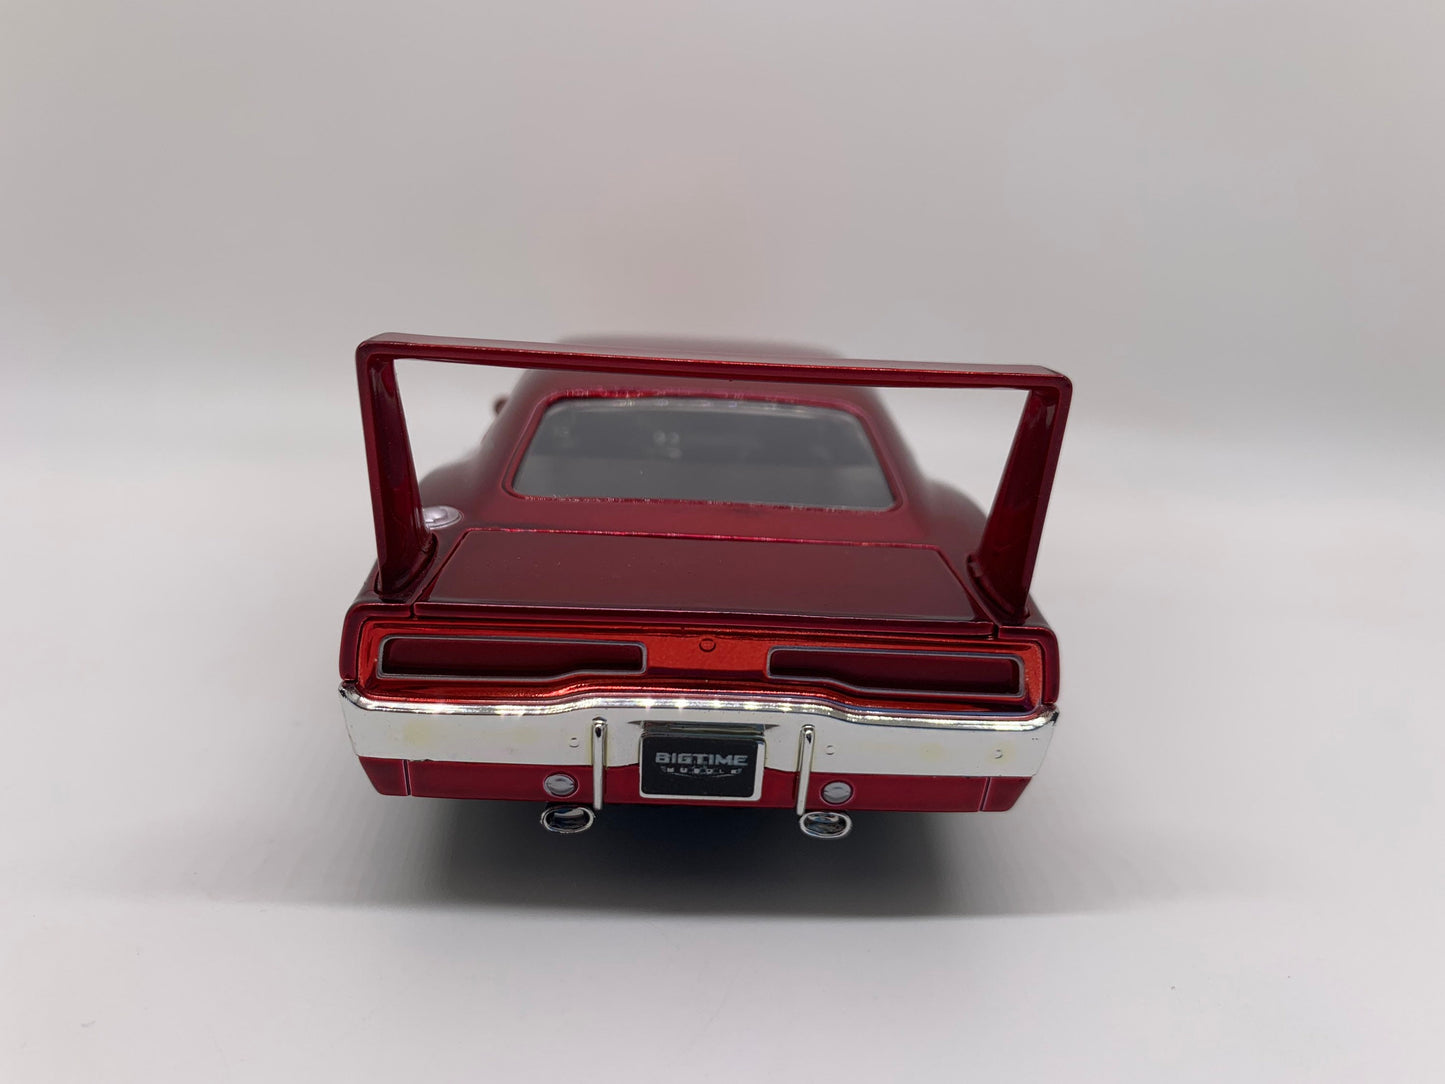 Jada 1969 Dodge Charger Daytona Dark Red Collectible 1:24 Scale Model Diecast Toy Car